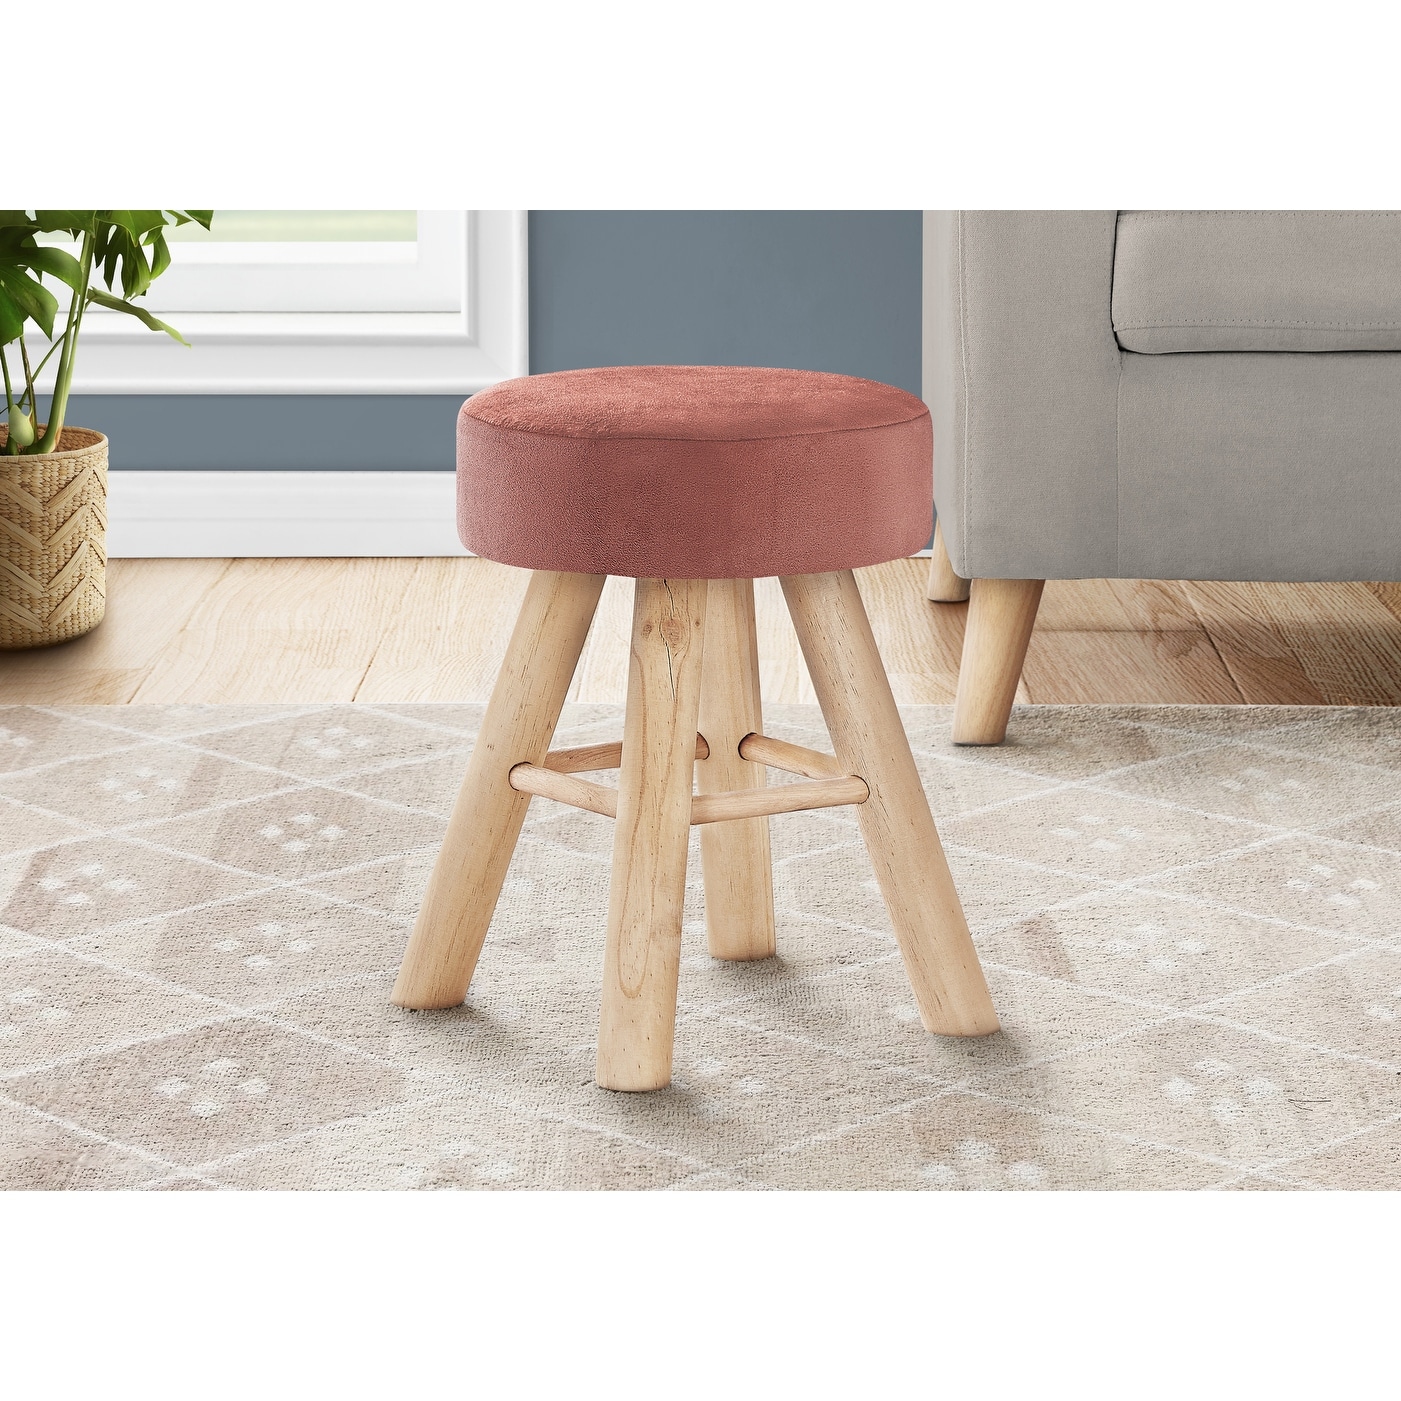 Ottoman, Pouf, Footrest, Foot Stool, 12 Round, Velvet, Wood Legs, Pink,  Natural, Contemporary, Modern - On Sale - Bed Bath & Beyond - 35897171